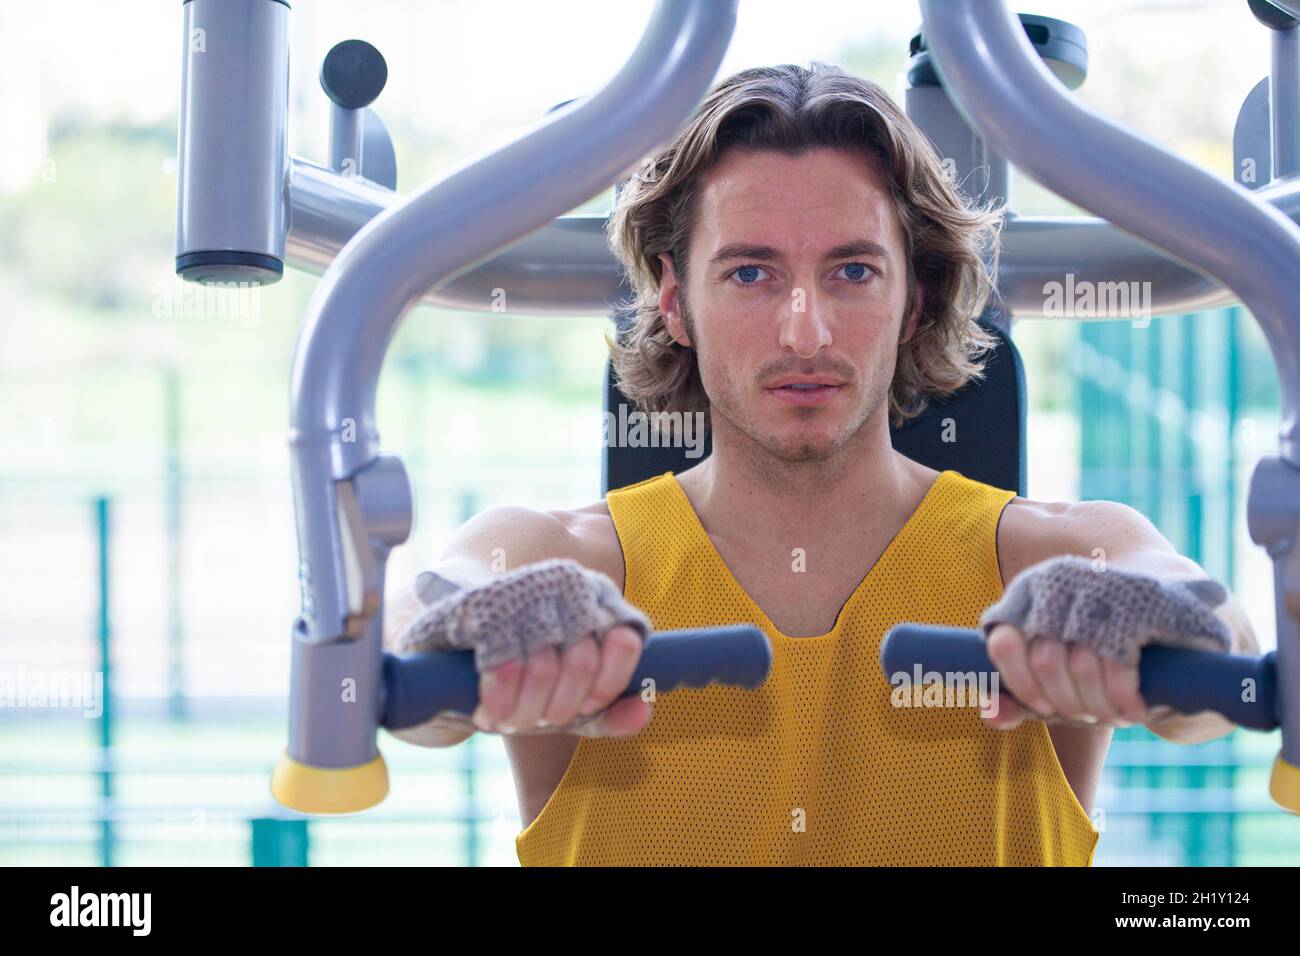 man working out on a pec deck at the gym Stock Photo